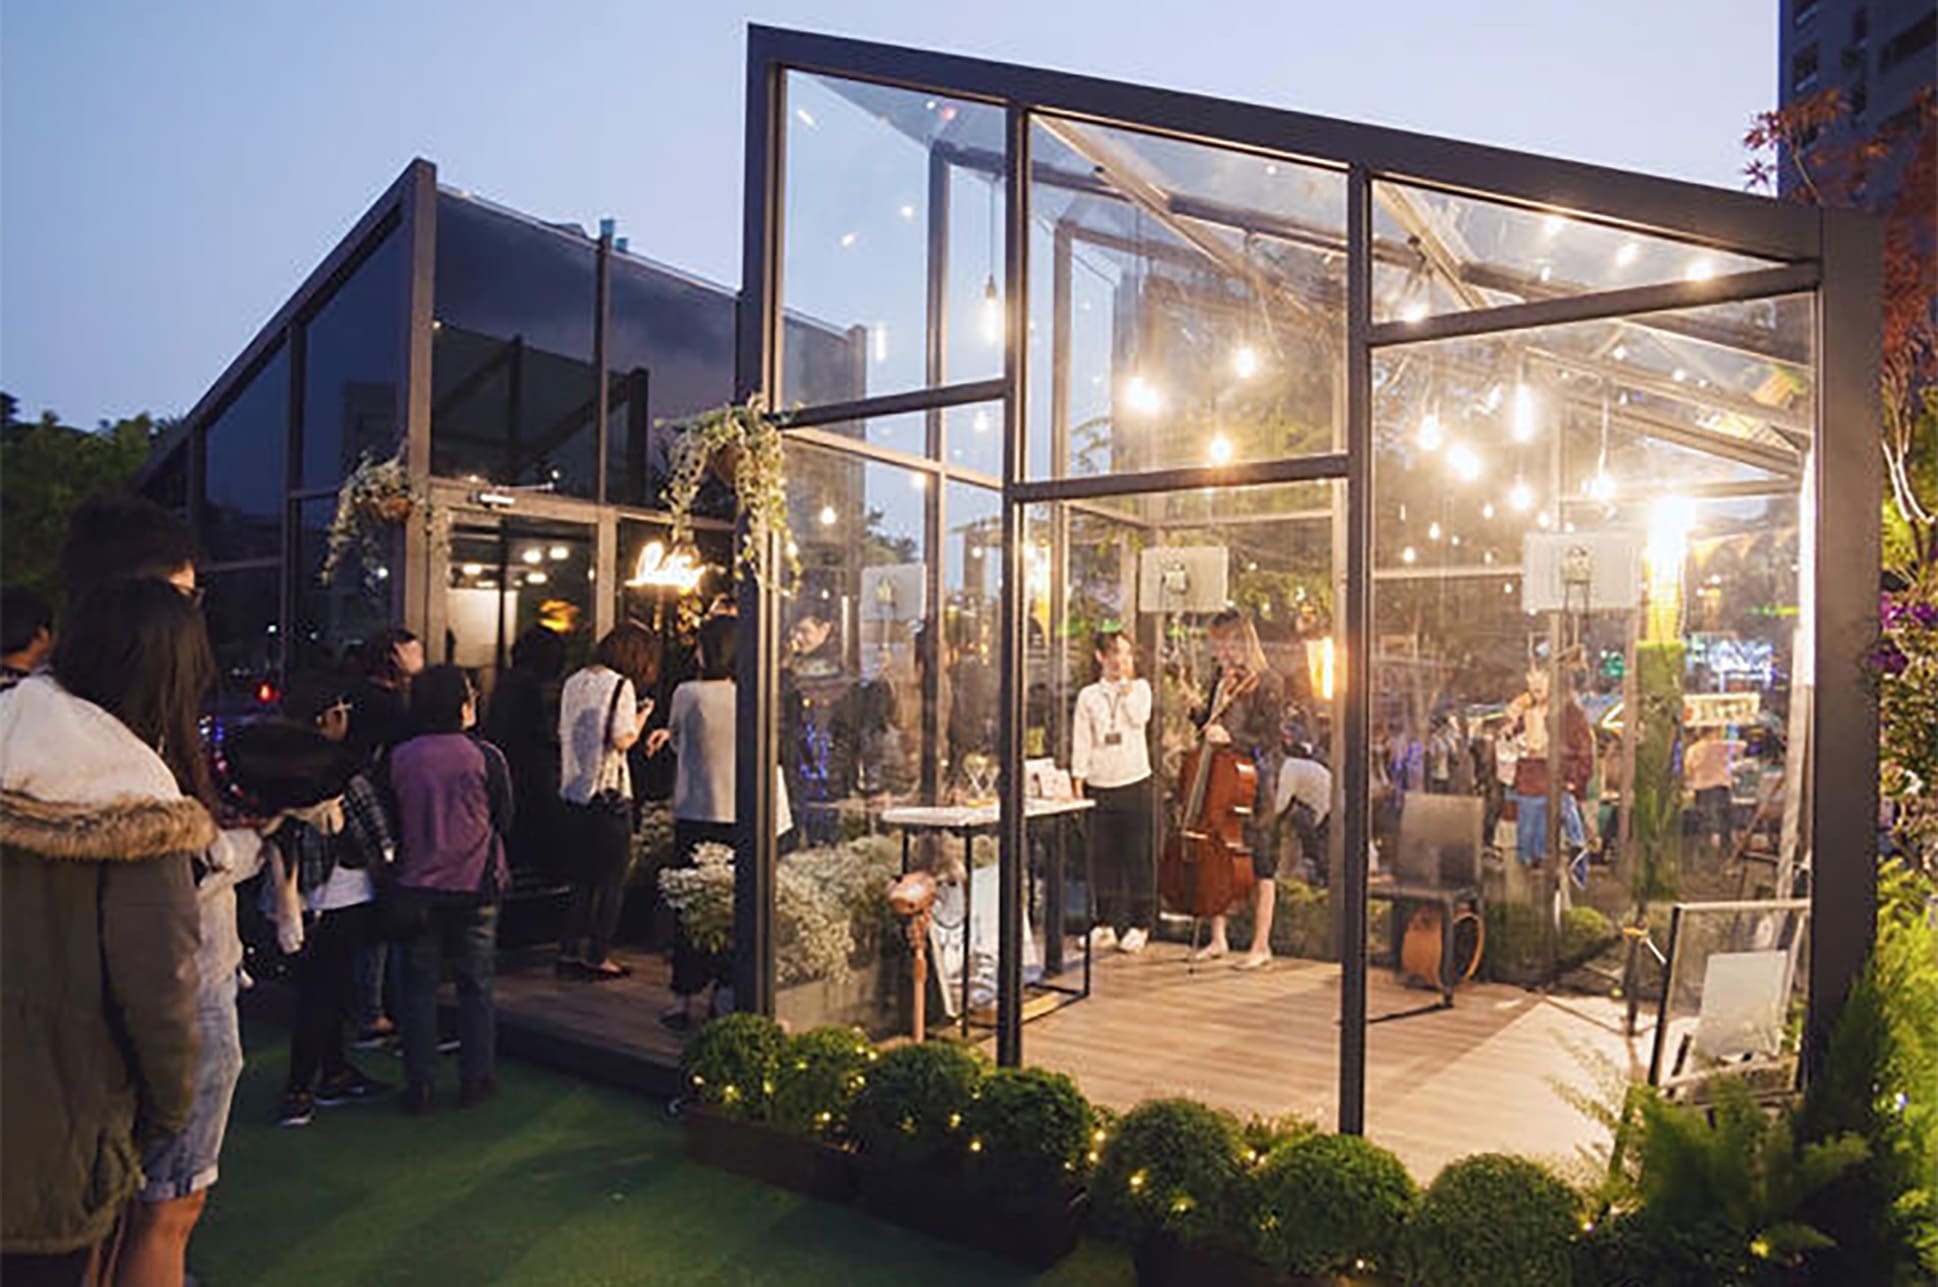 Gathering of students in a glass house outdoors for an event.